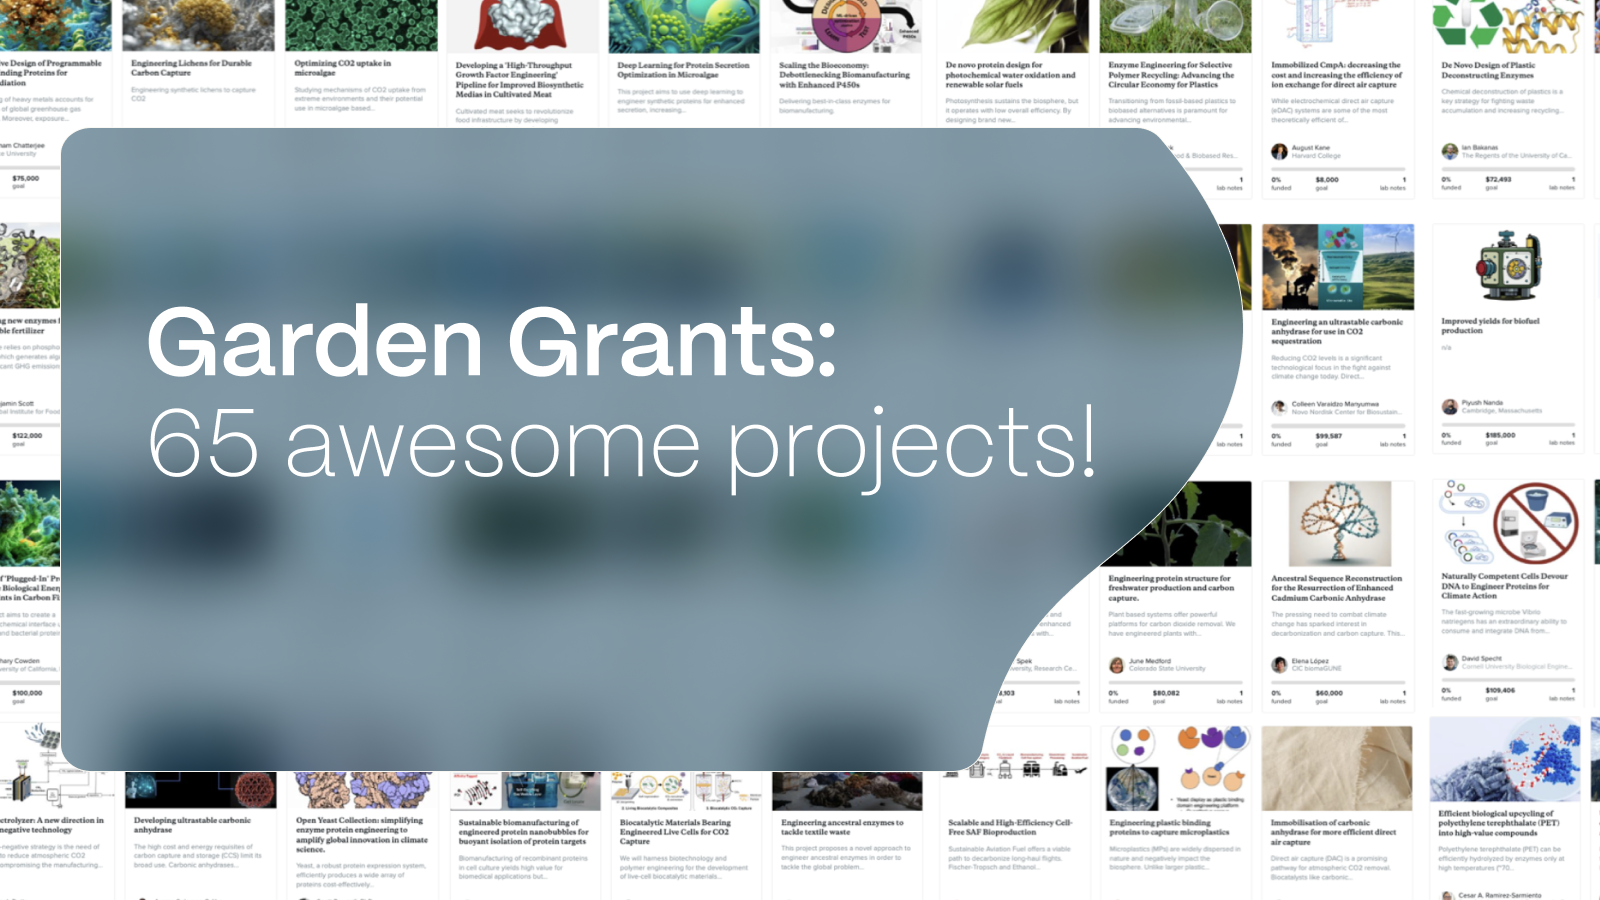 Image showing 65 climate biotech projects on the Experiment.com website with the text over "Garden Grants: 65 awesome projects!"